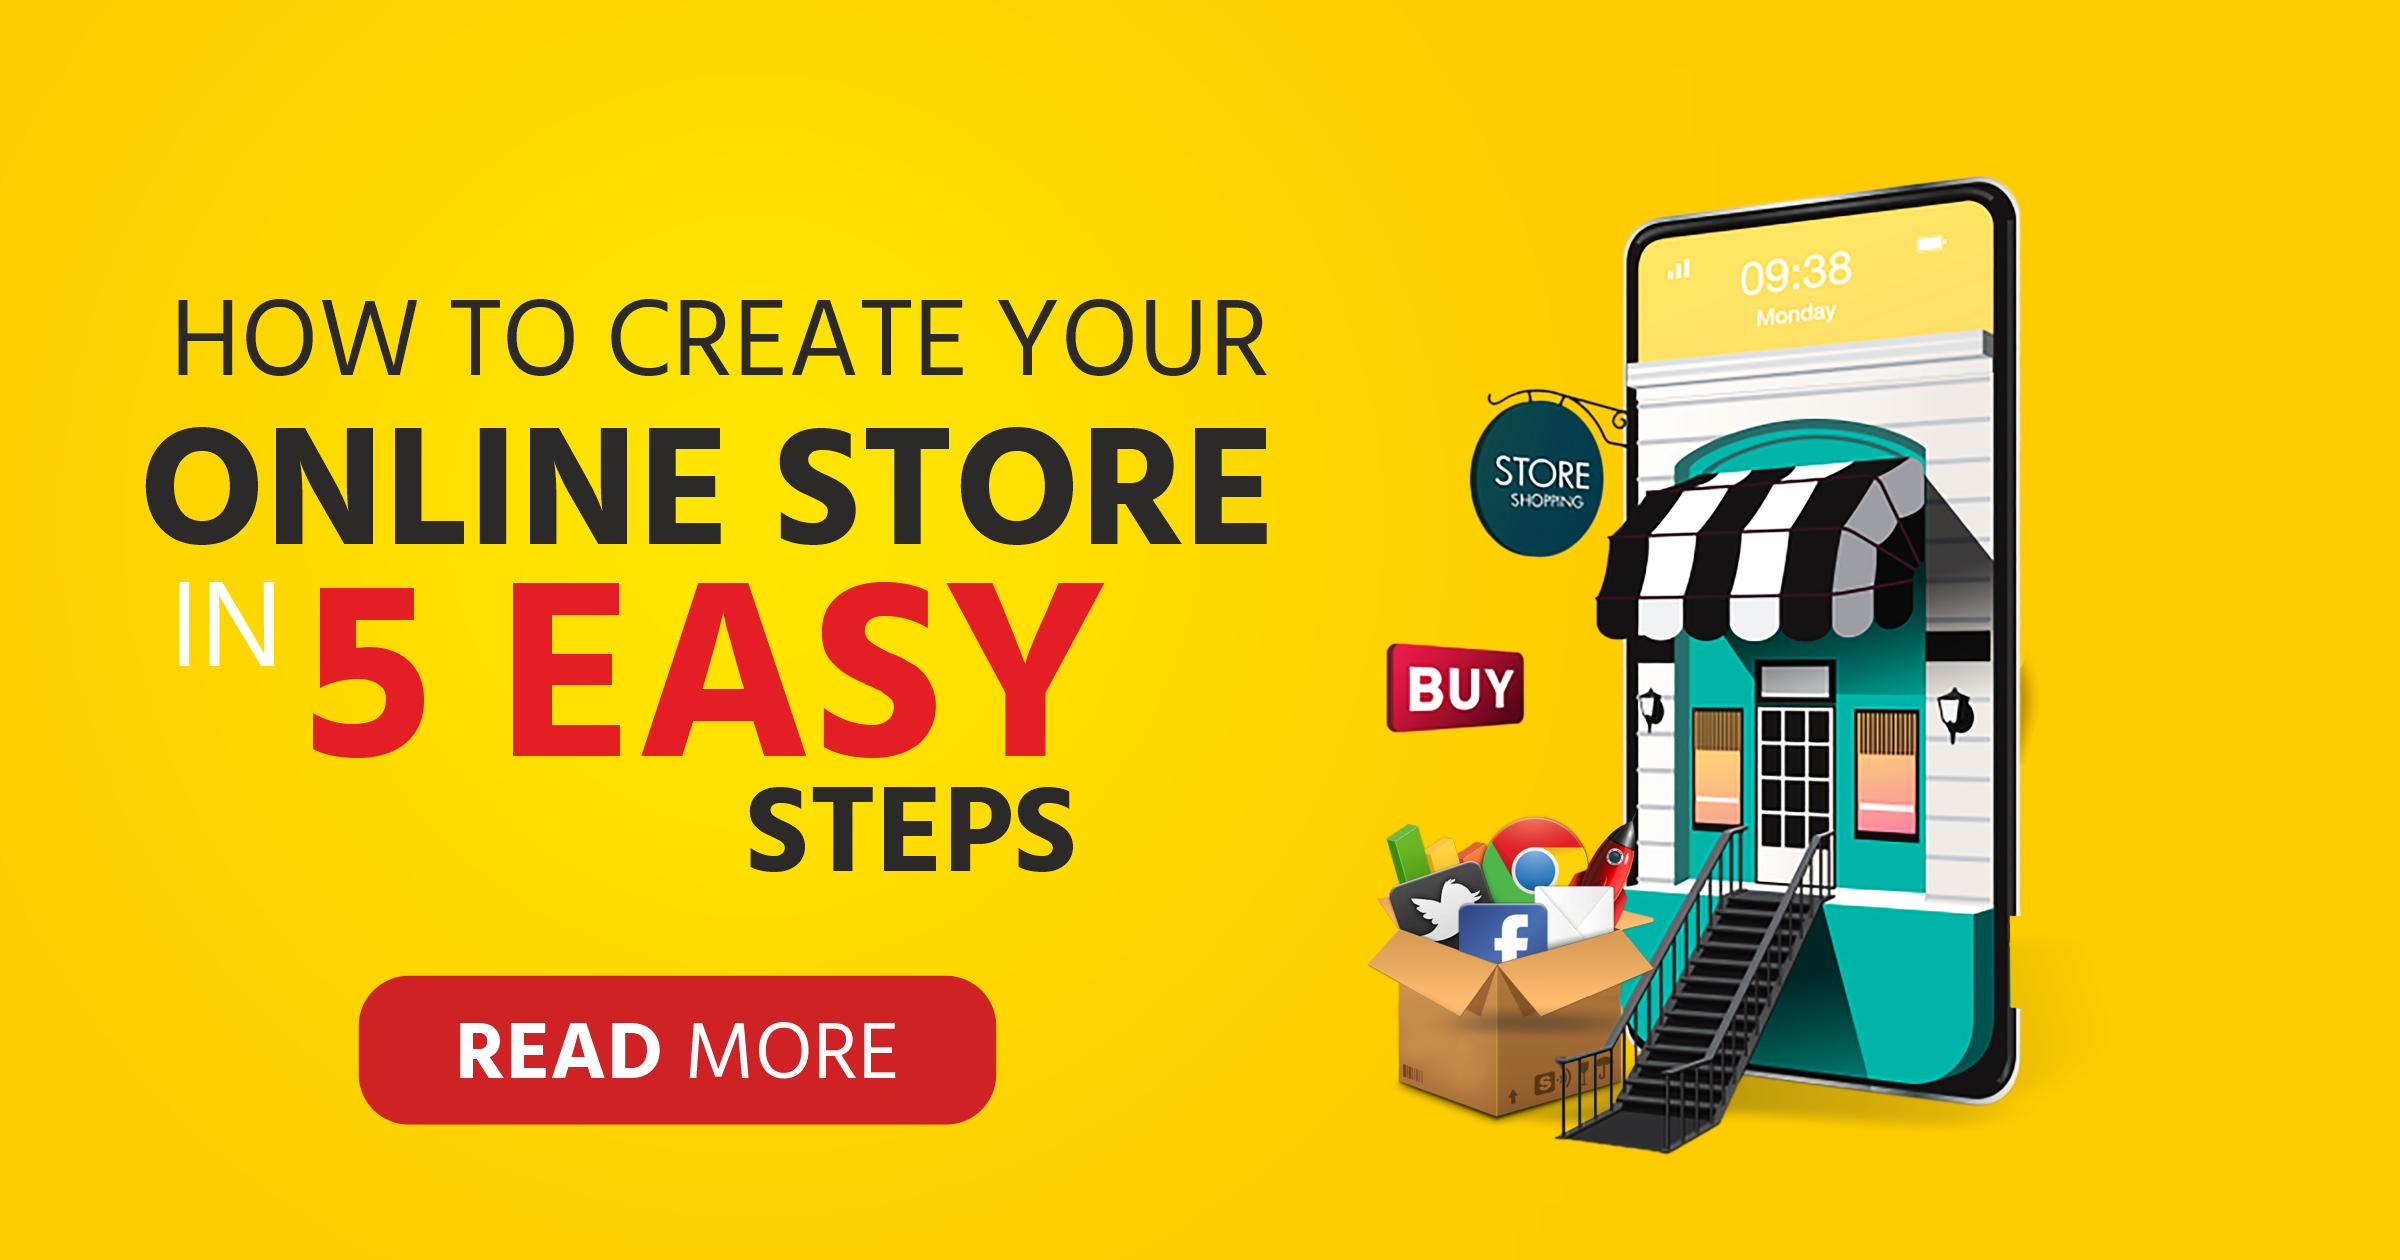 How To Create Your Online Store In 5 Easy Steps